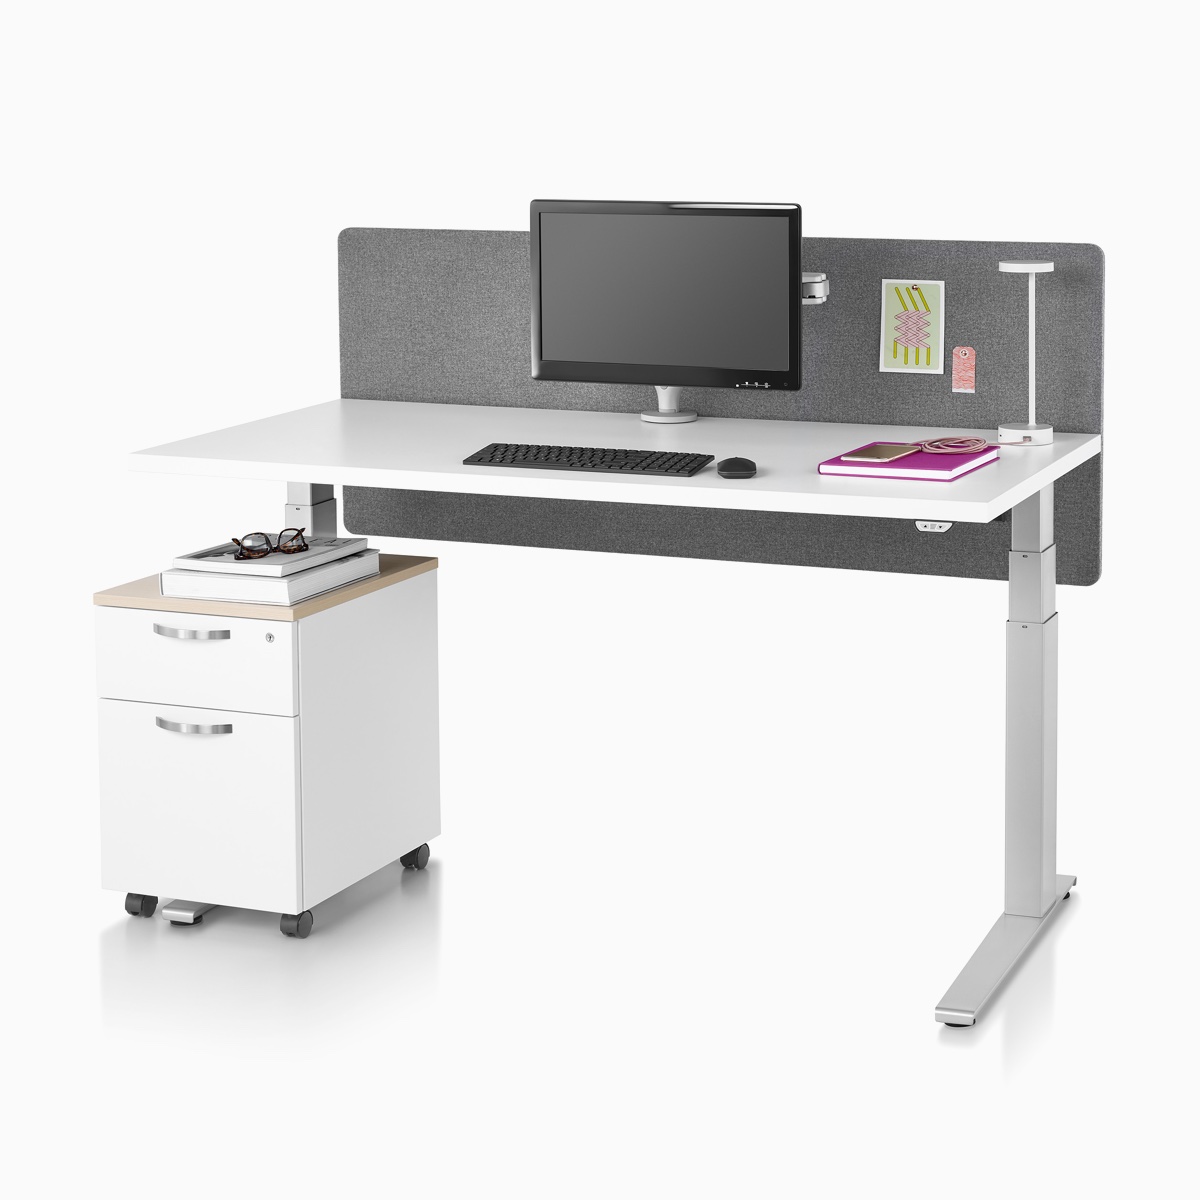 A Motia standing desk with a white top, metallic silver base, surface-attached privacy screen, desk lamp, and a Tu Wood pedestal.